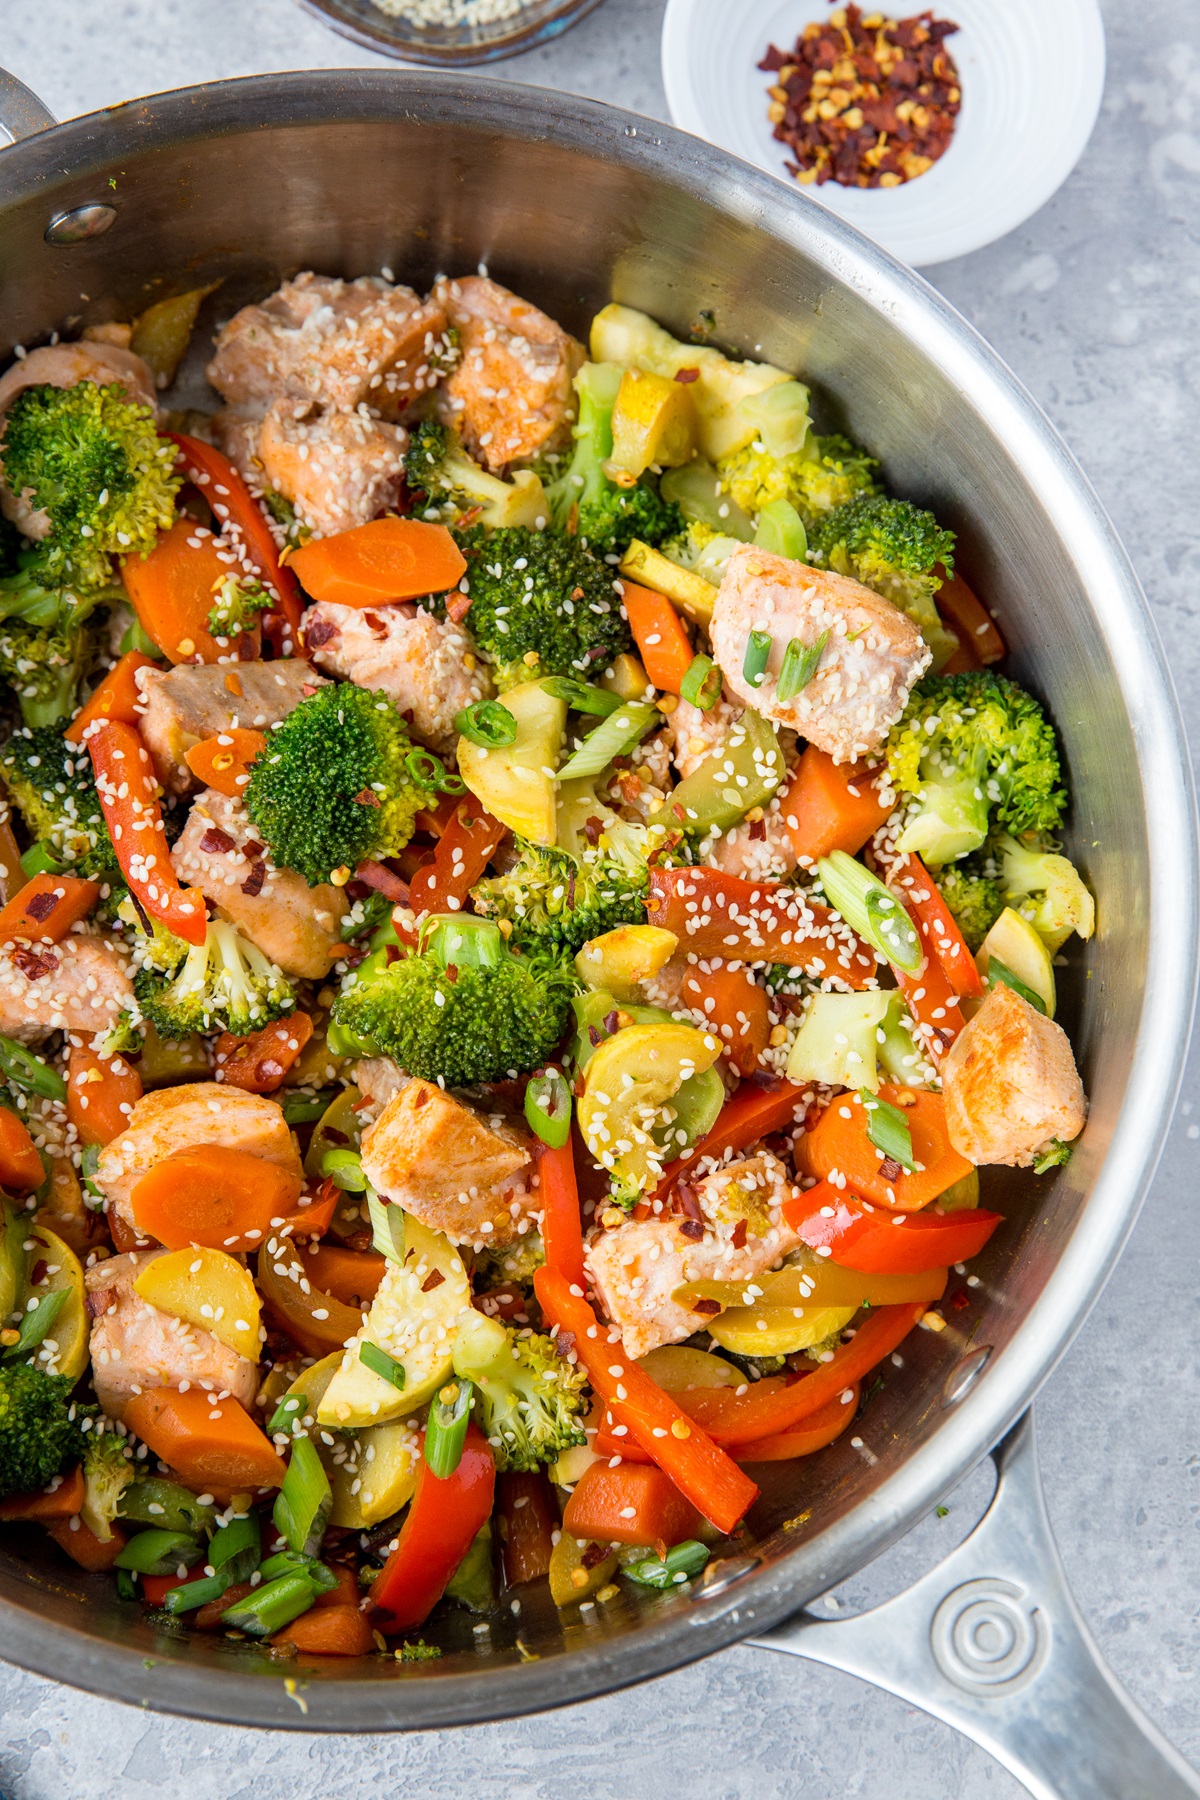 Stainless steel skillet with finished stir-fry salmon and vegetables, ready to consume.